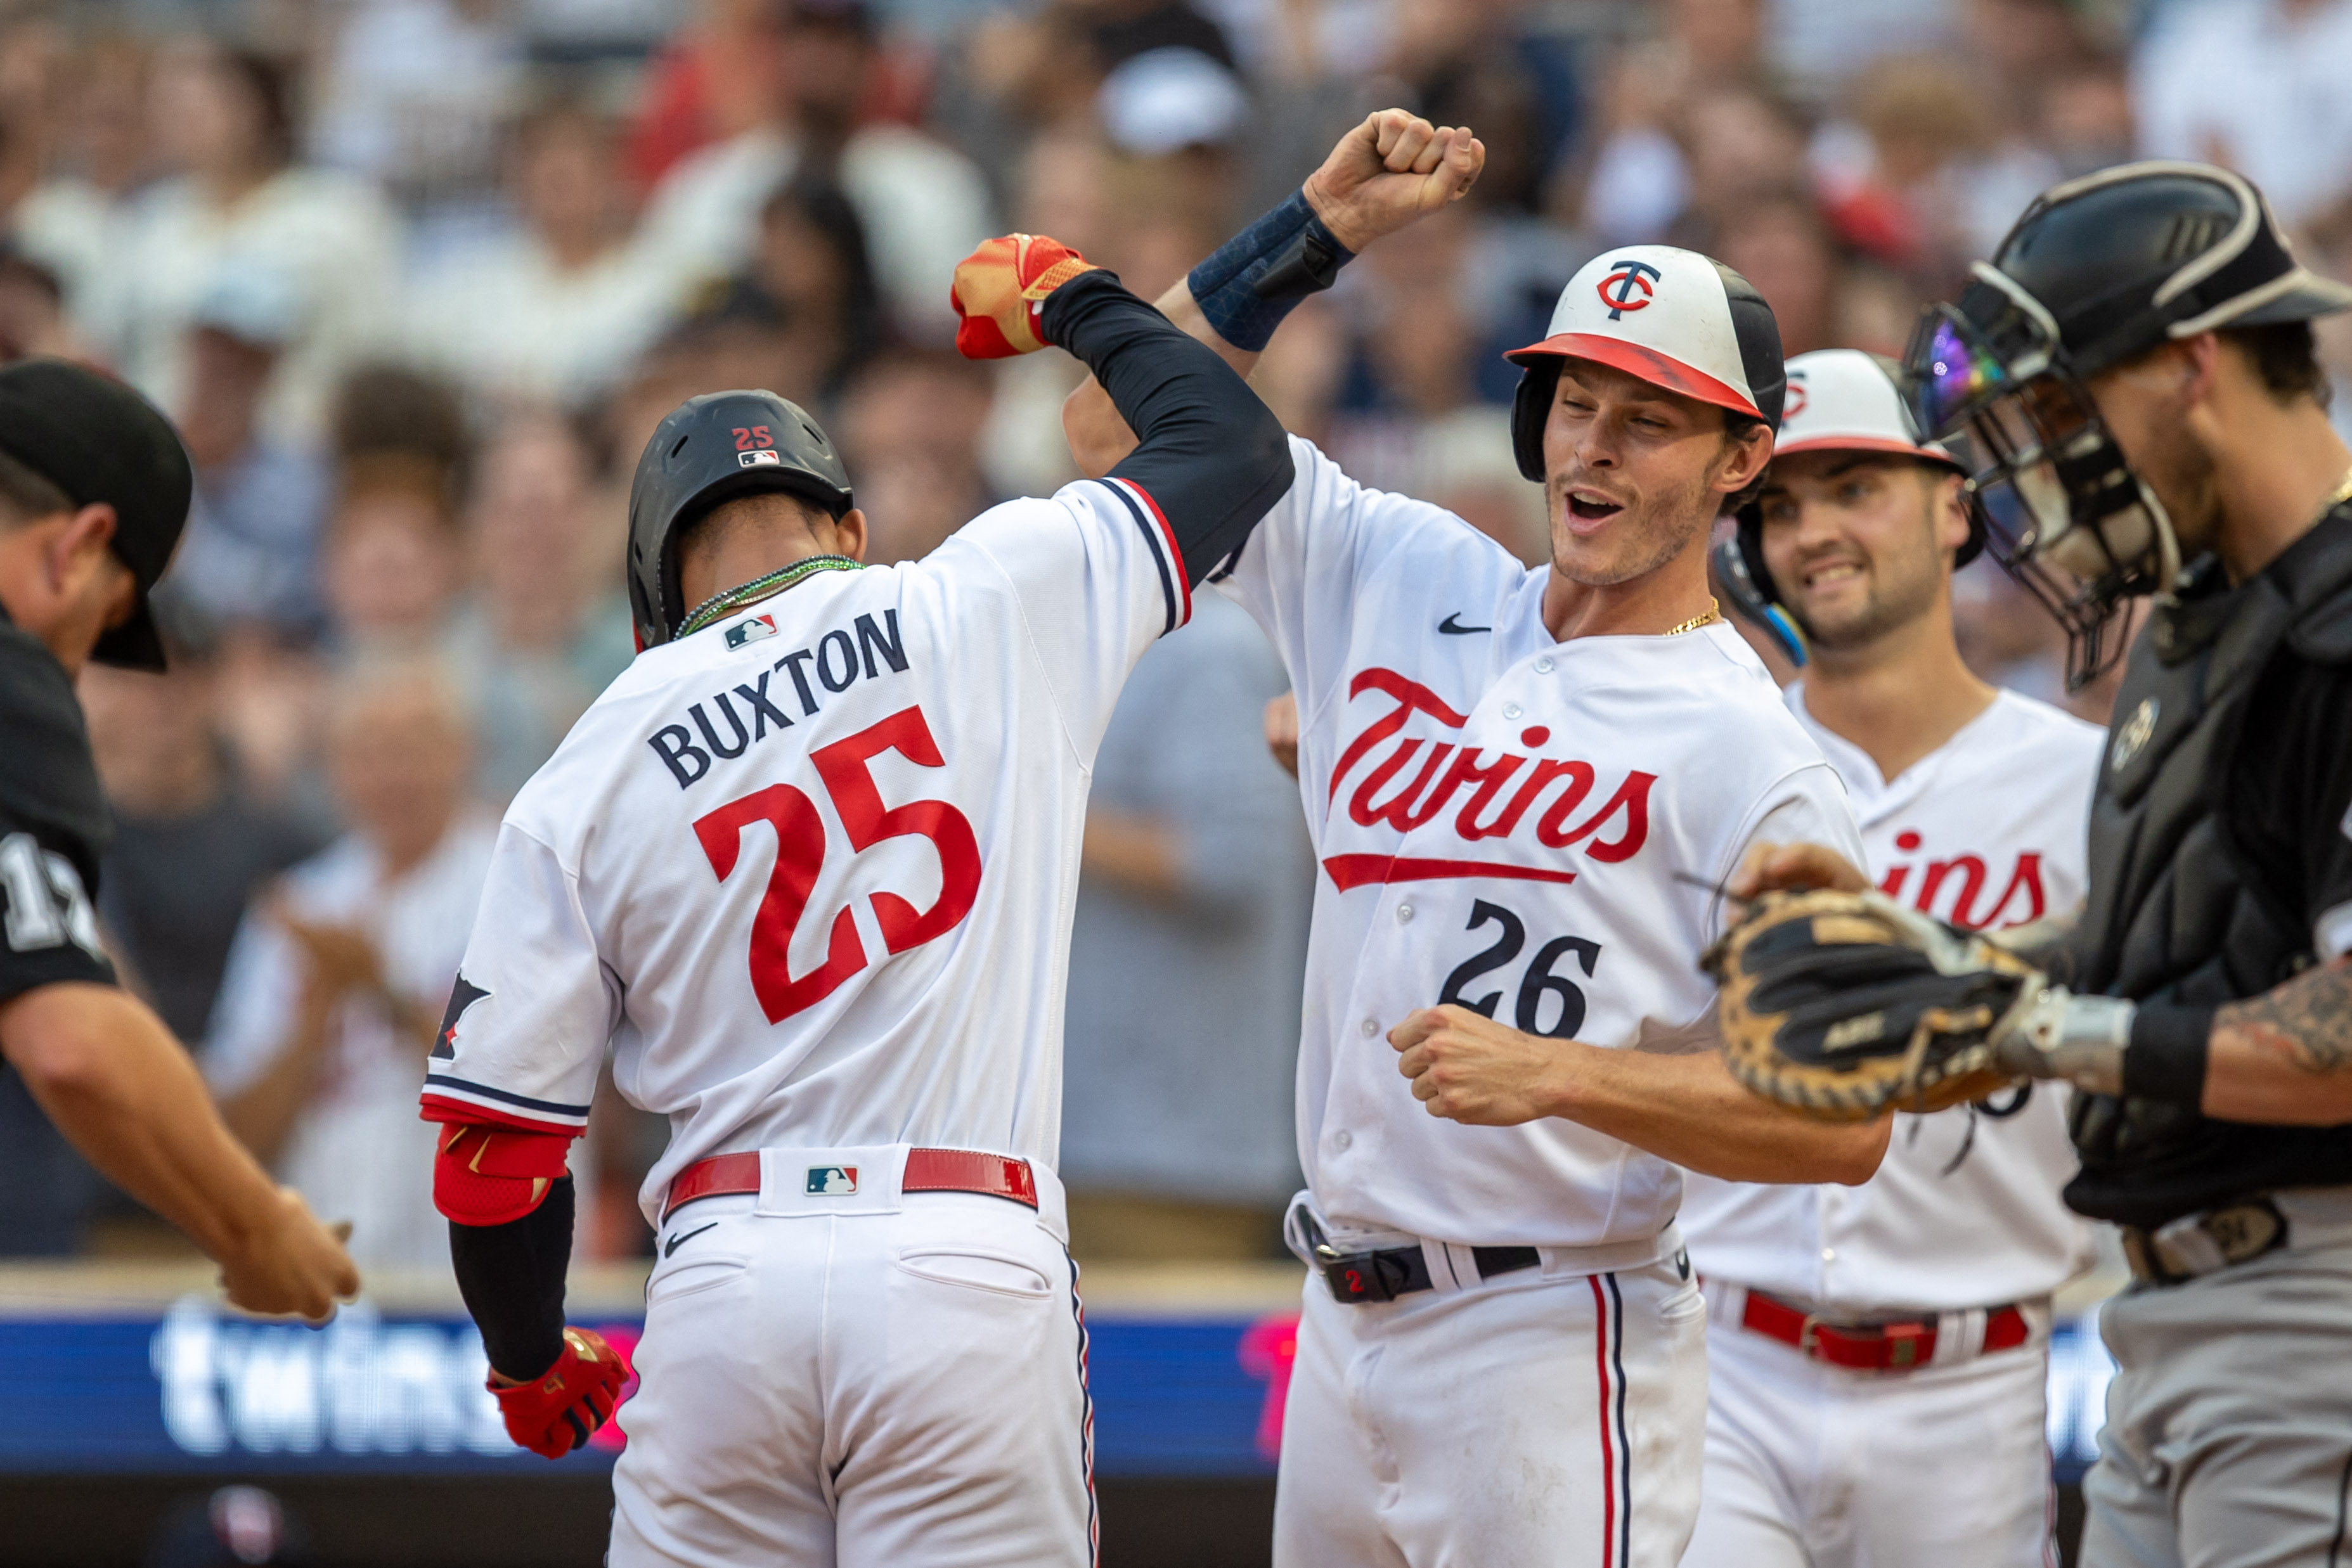 Buxton's 2nd HR, 469-foot shot, lifts Twins over ChiSox 6-4